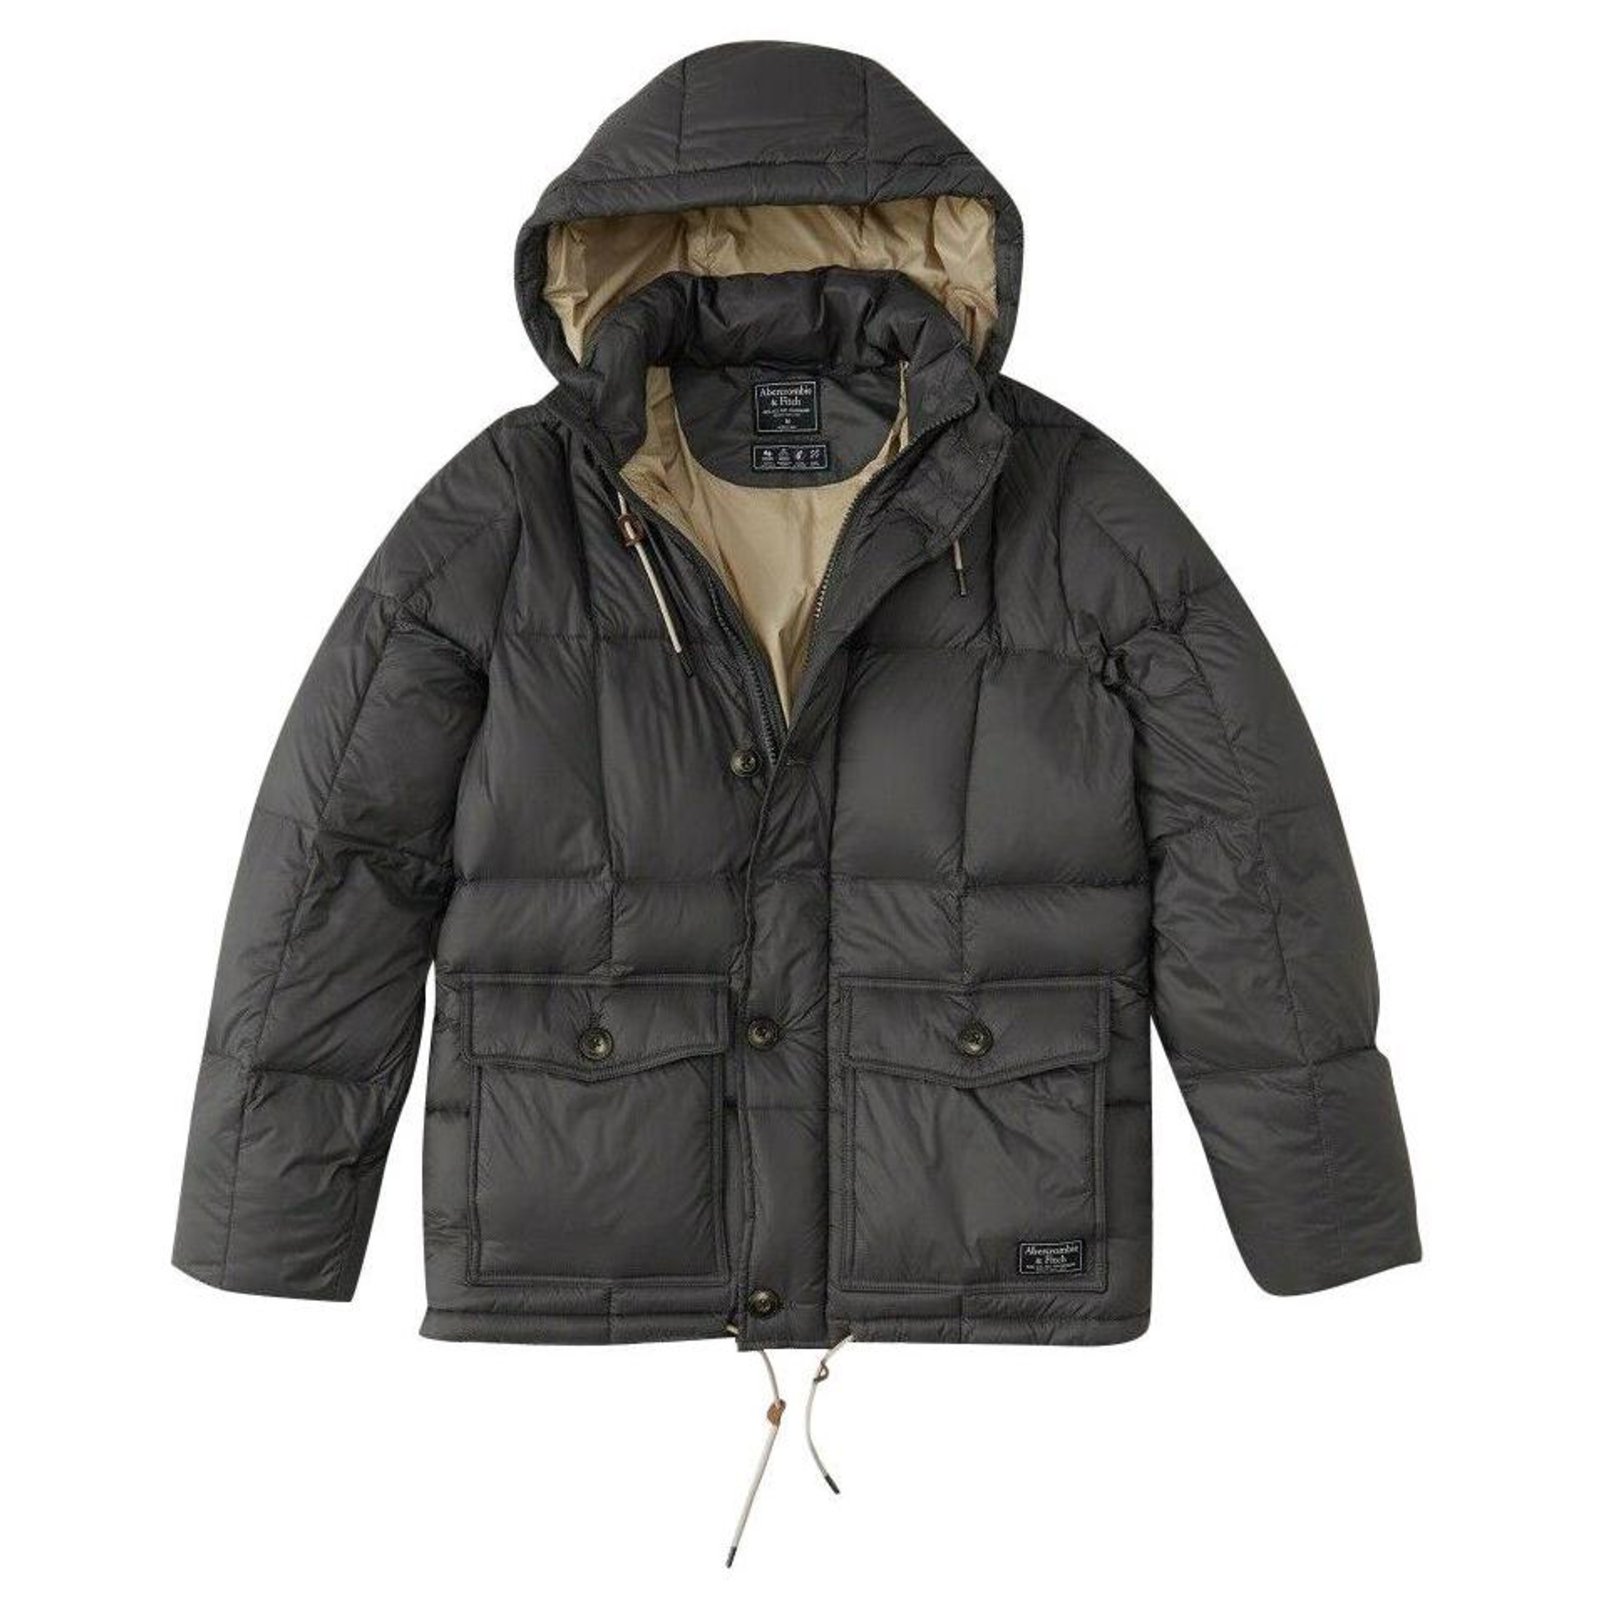 Abercrombie & Fitch, Jackets & Coats, Abercrombie And Fitch Down Feather  Vest Mediun